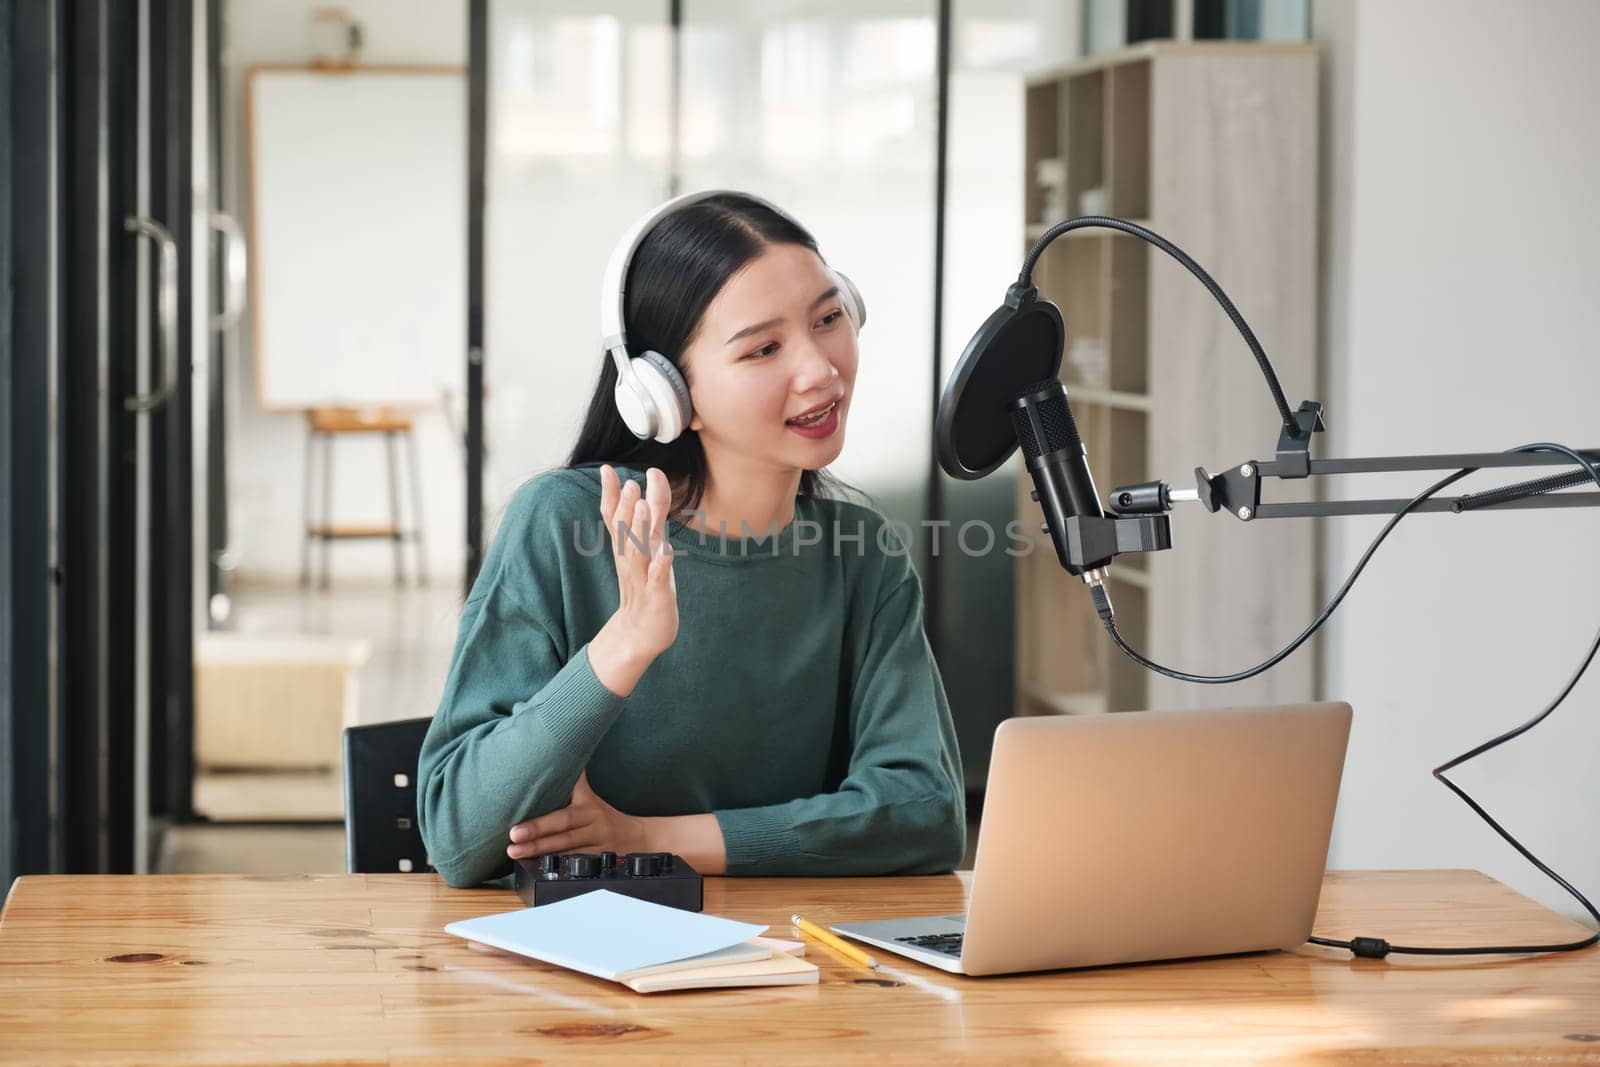 A woman wearing headphones is talking into a microphone by ijeab